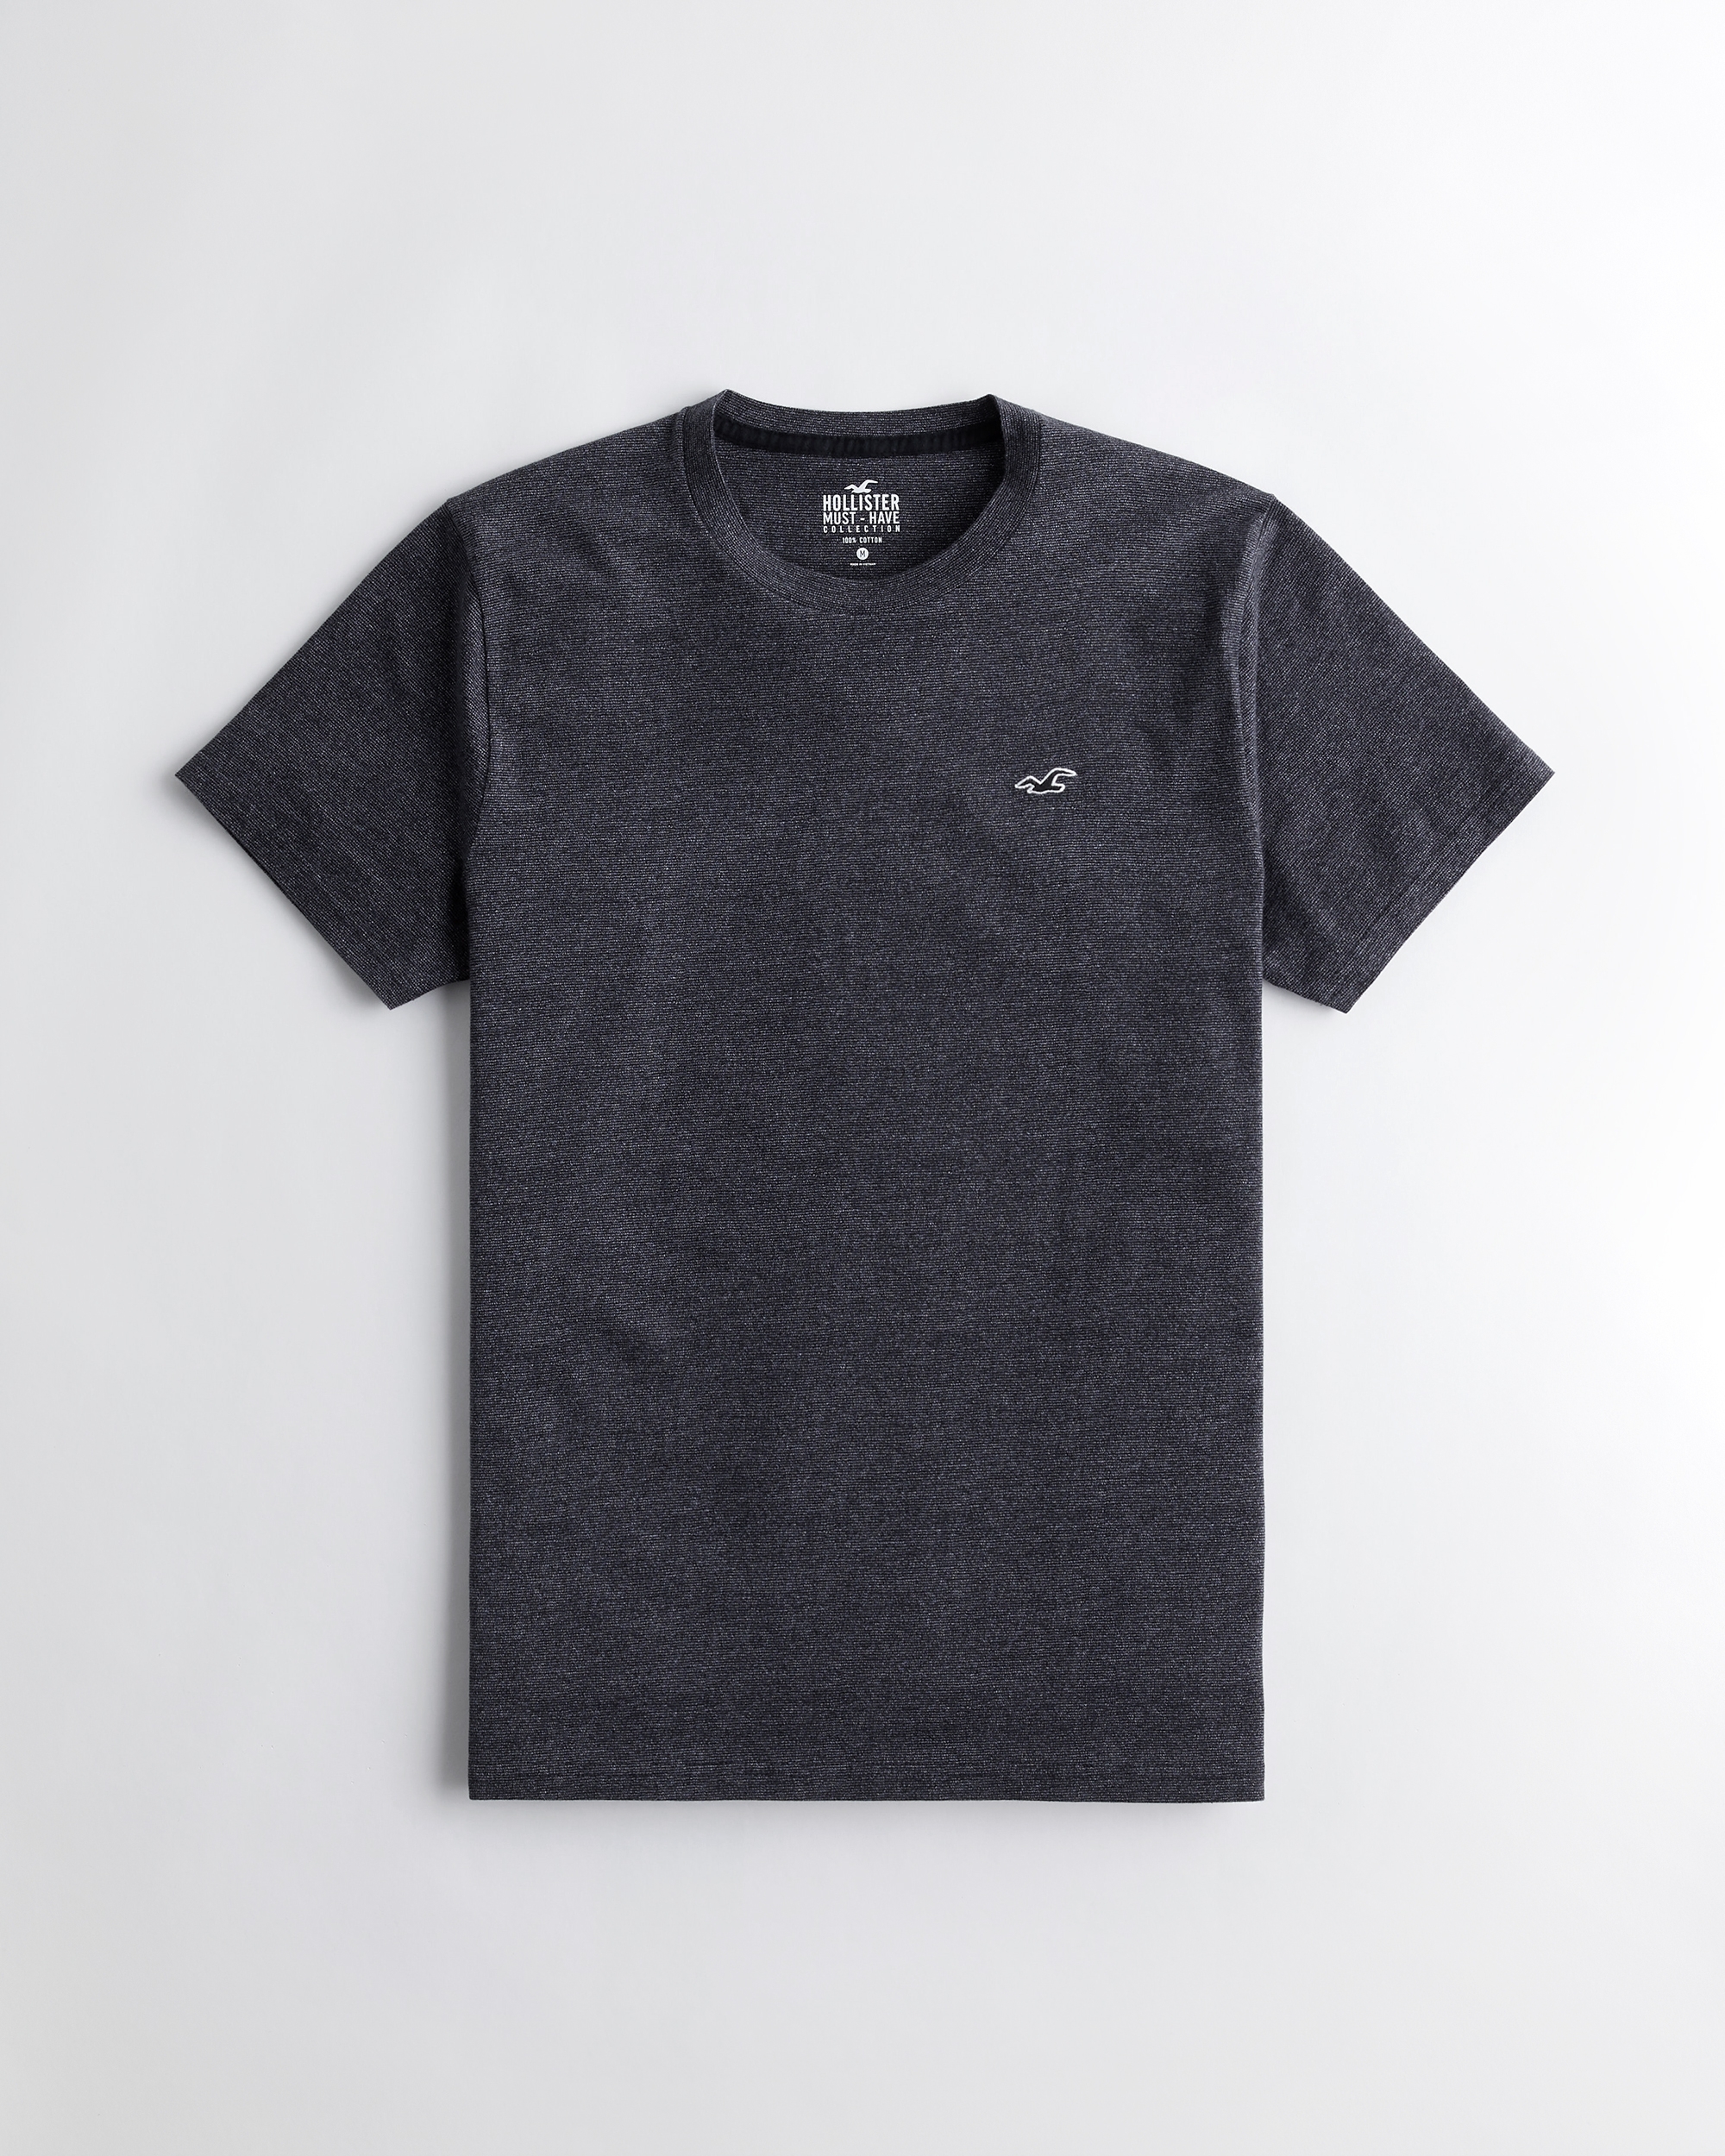 Tops for Guys | Hollister Co